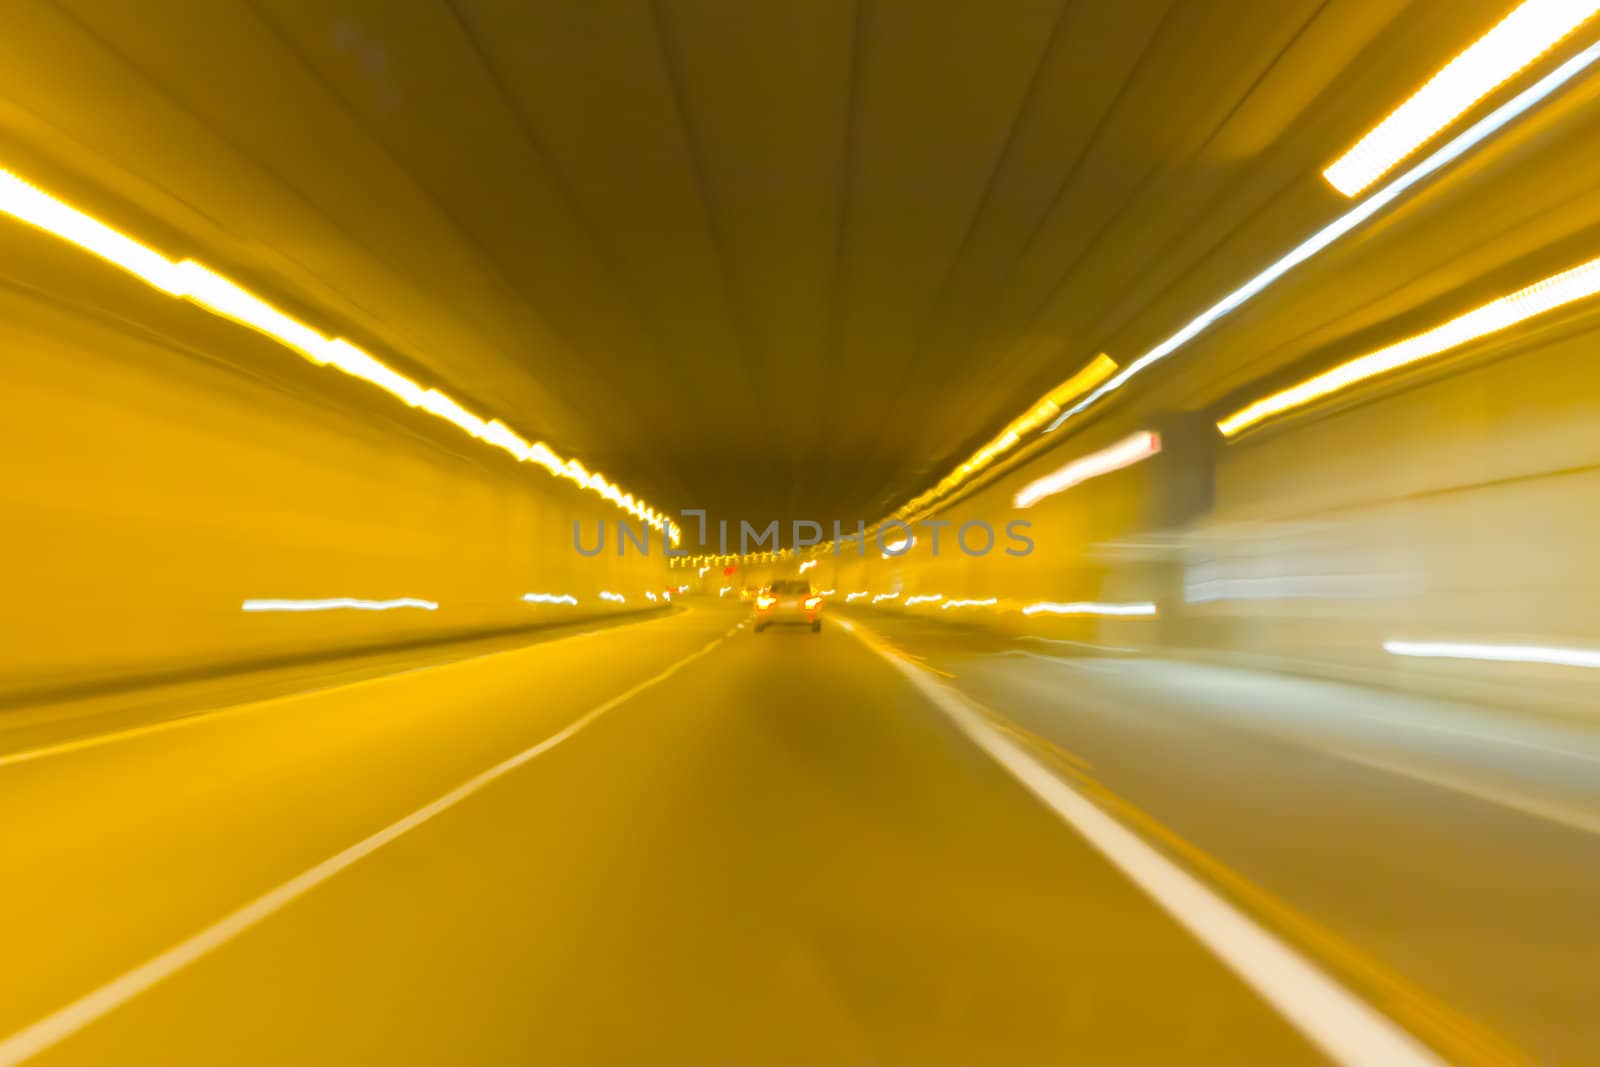 Insane speeding in a tunnel with a close to death experience